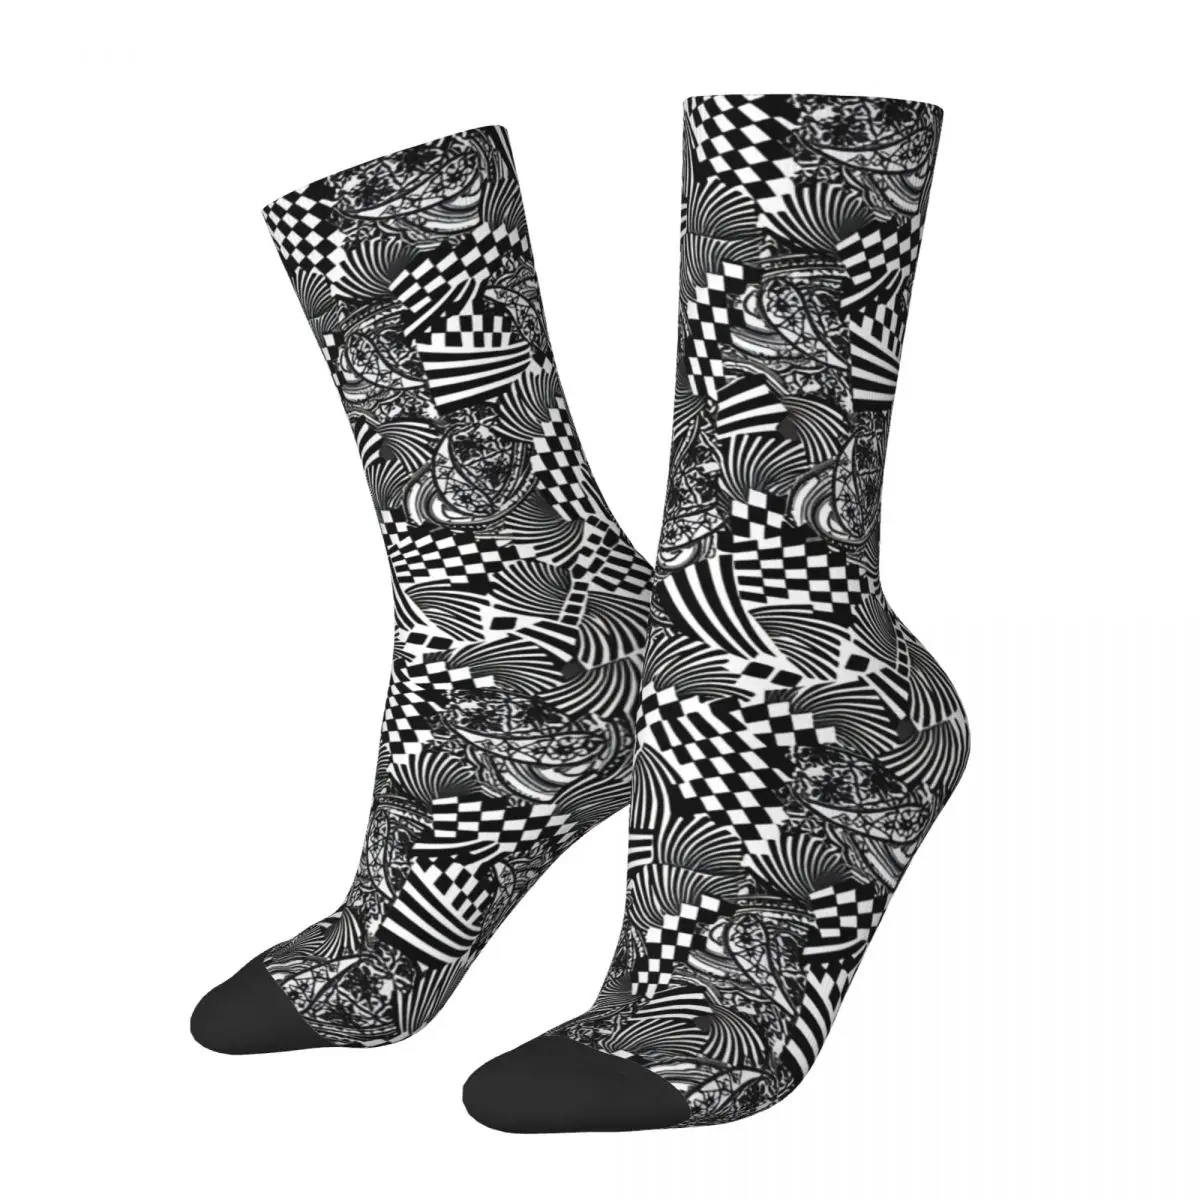 

Crazy compression Geometric Cashmere Paisley Sock for Men Harajuku Black And White Paisley Seamless Pattern Crew Sock Novelty